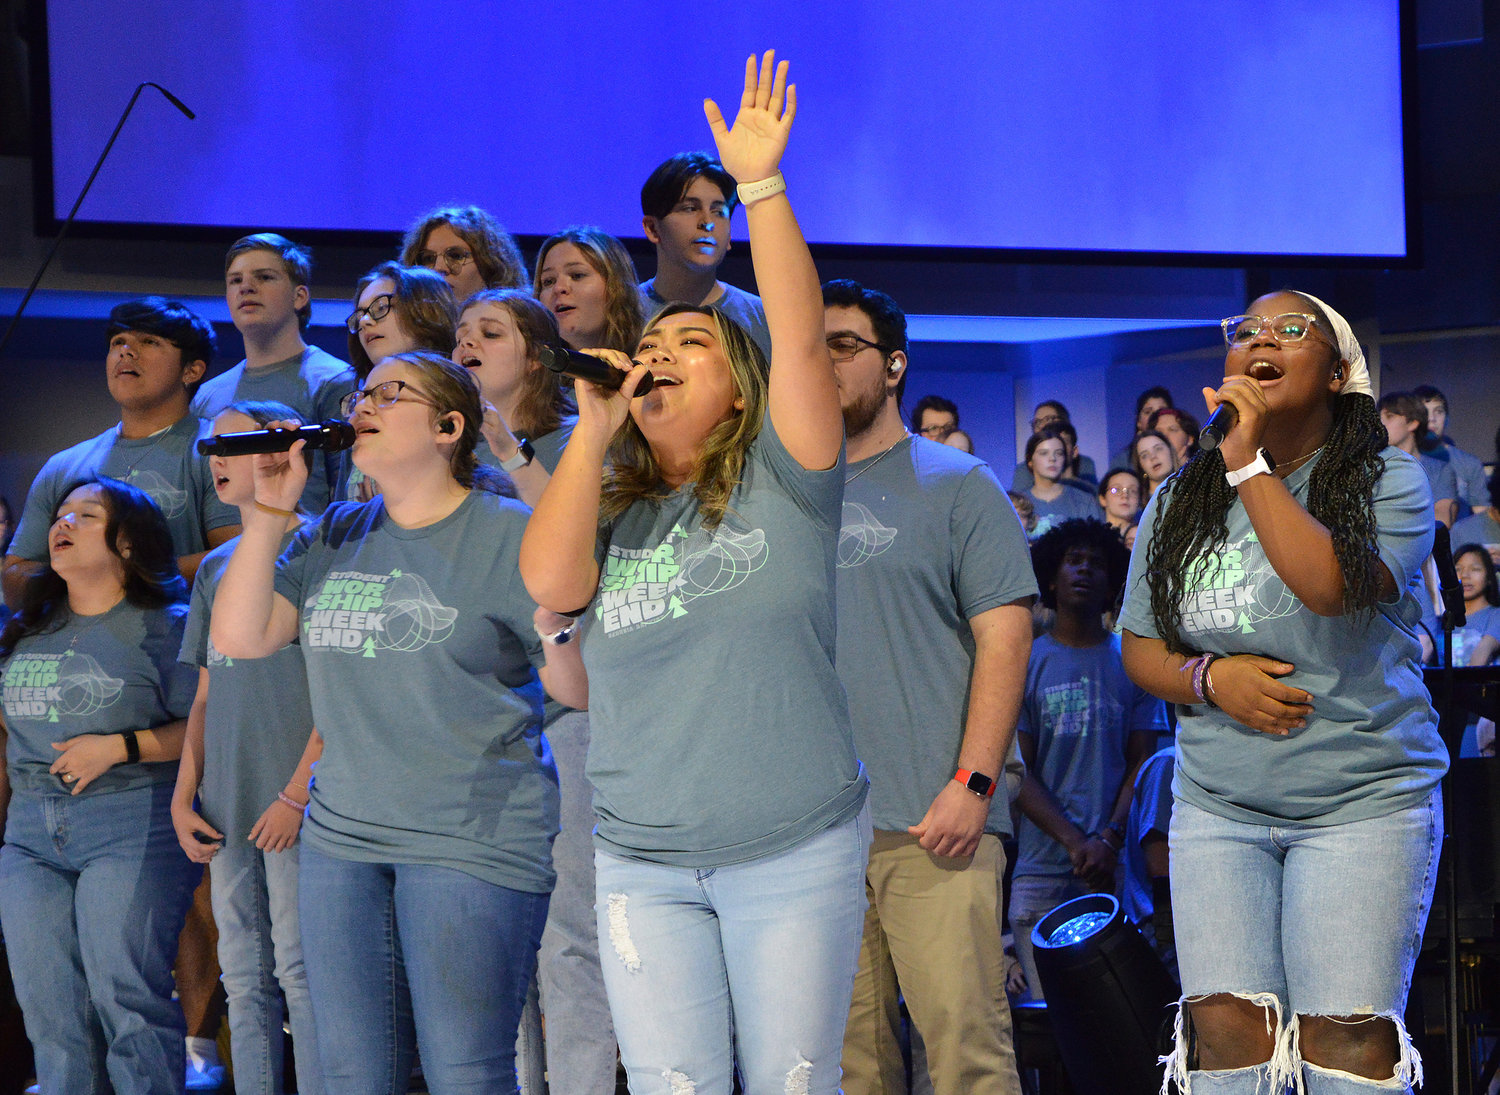 Hadley Sansom, center left, Kristy Xiong and Lily Allred, right, sing during a worship concert at the conclusion of REEL Fest 2023 held at First Baptist Church of Jonesboro, Ga., Saturday, Jan. 21, 2023. (Index/Henry Durand)